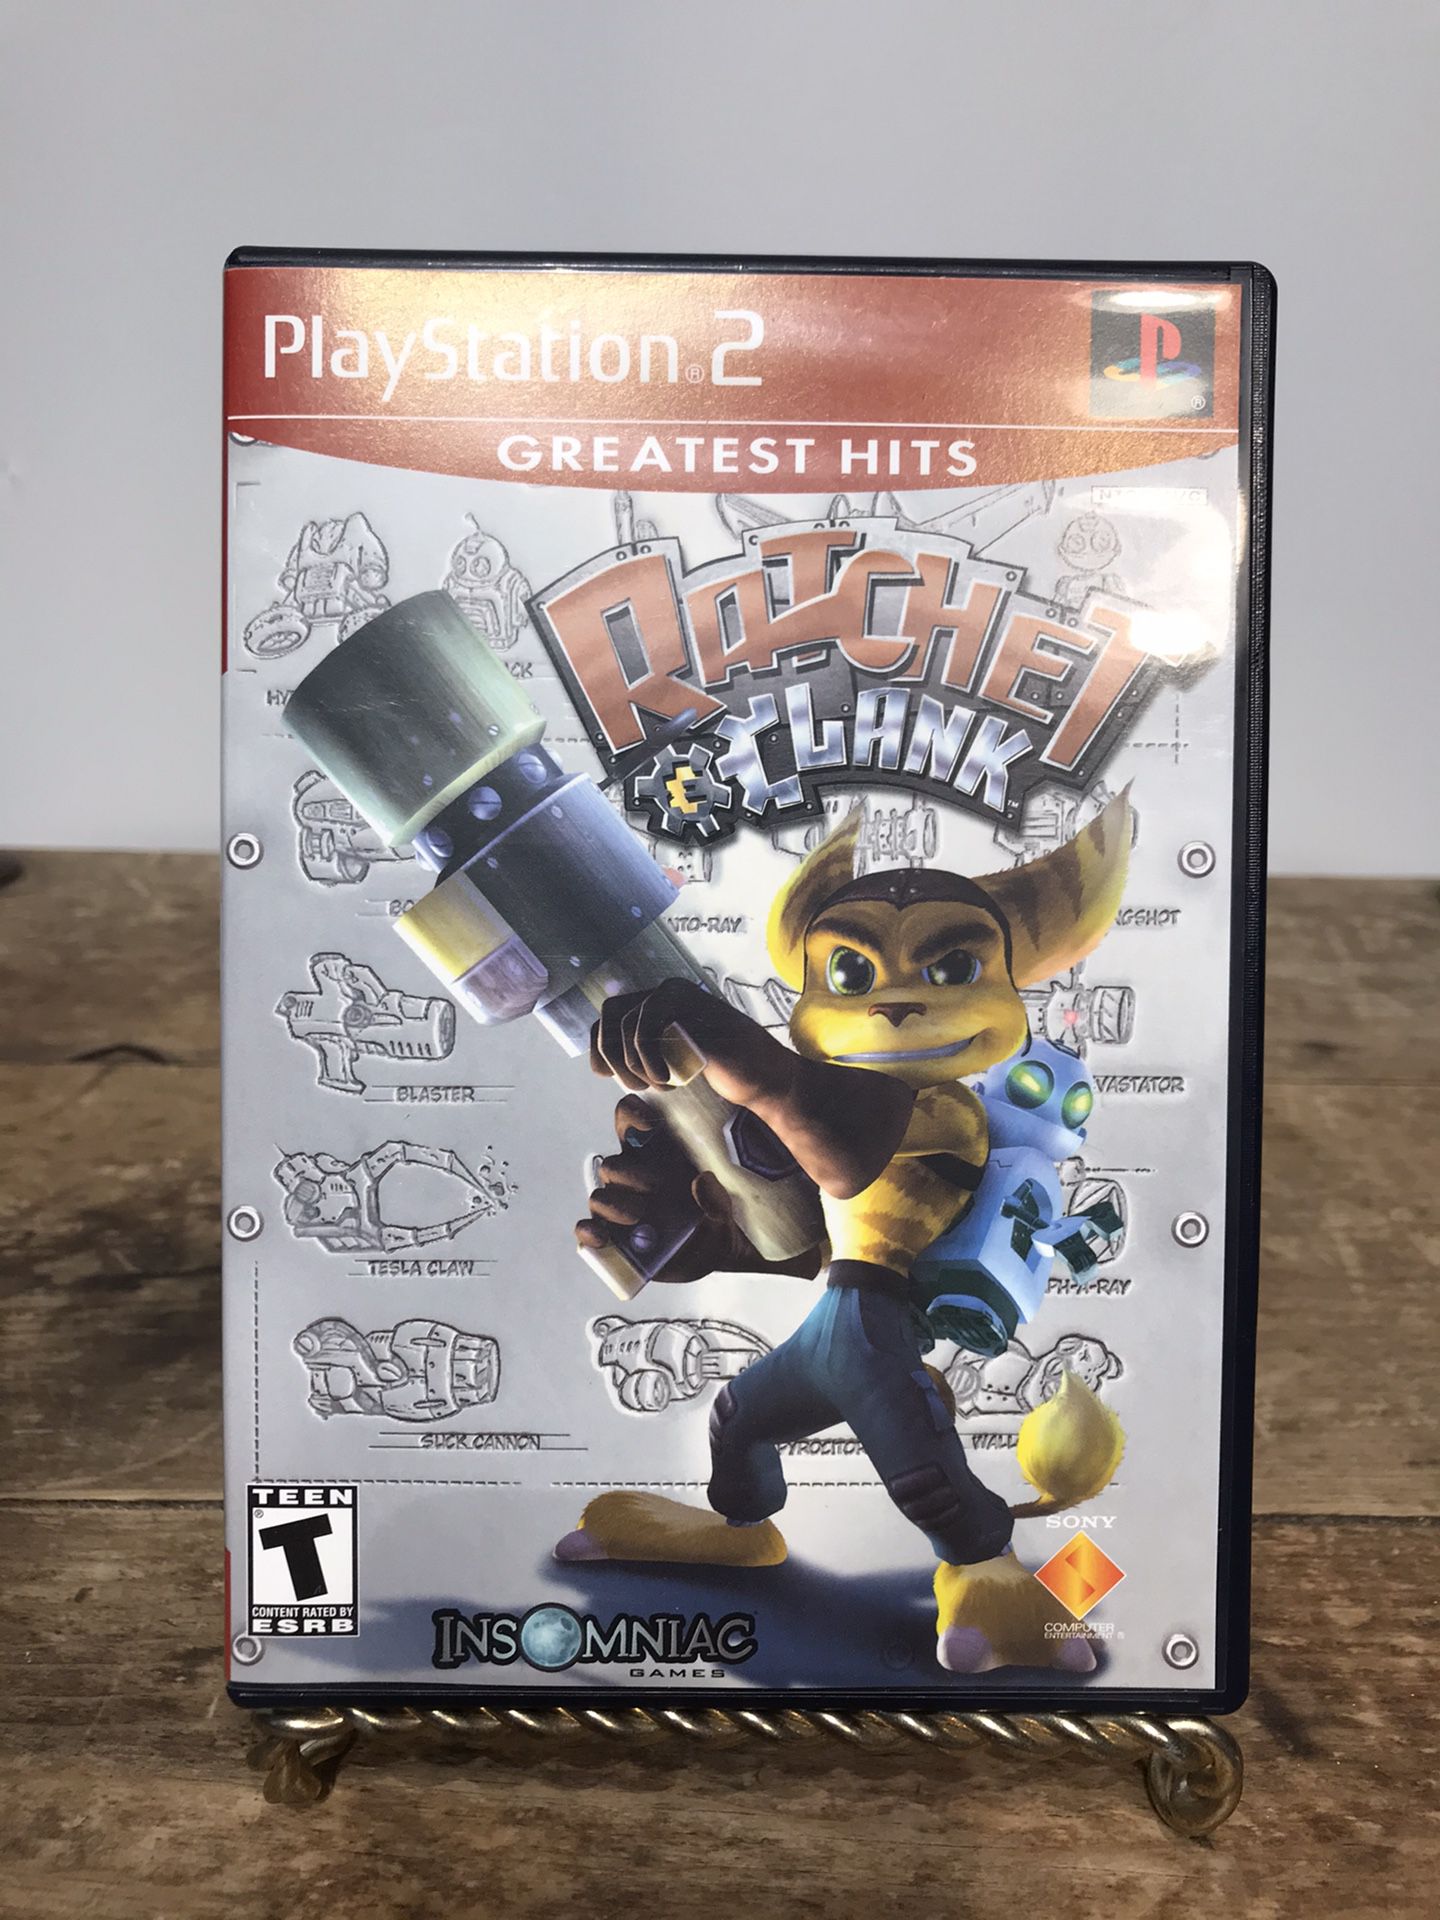 Ratchet & Clank for Playstation 2, Cleaned, Tested and works great 🎮❄️🕹